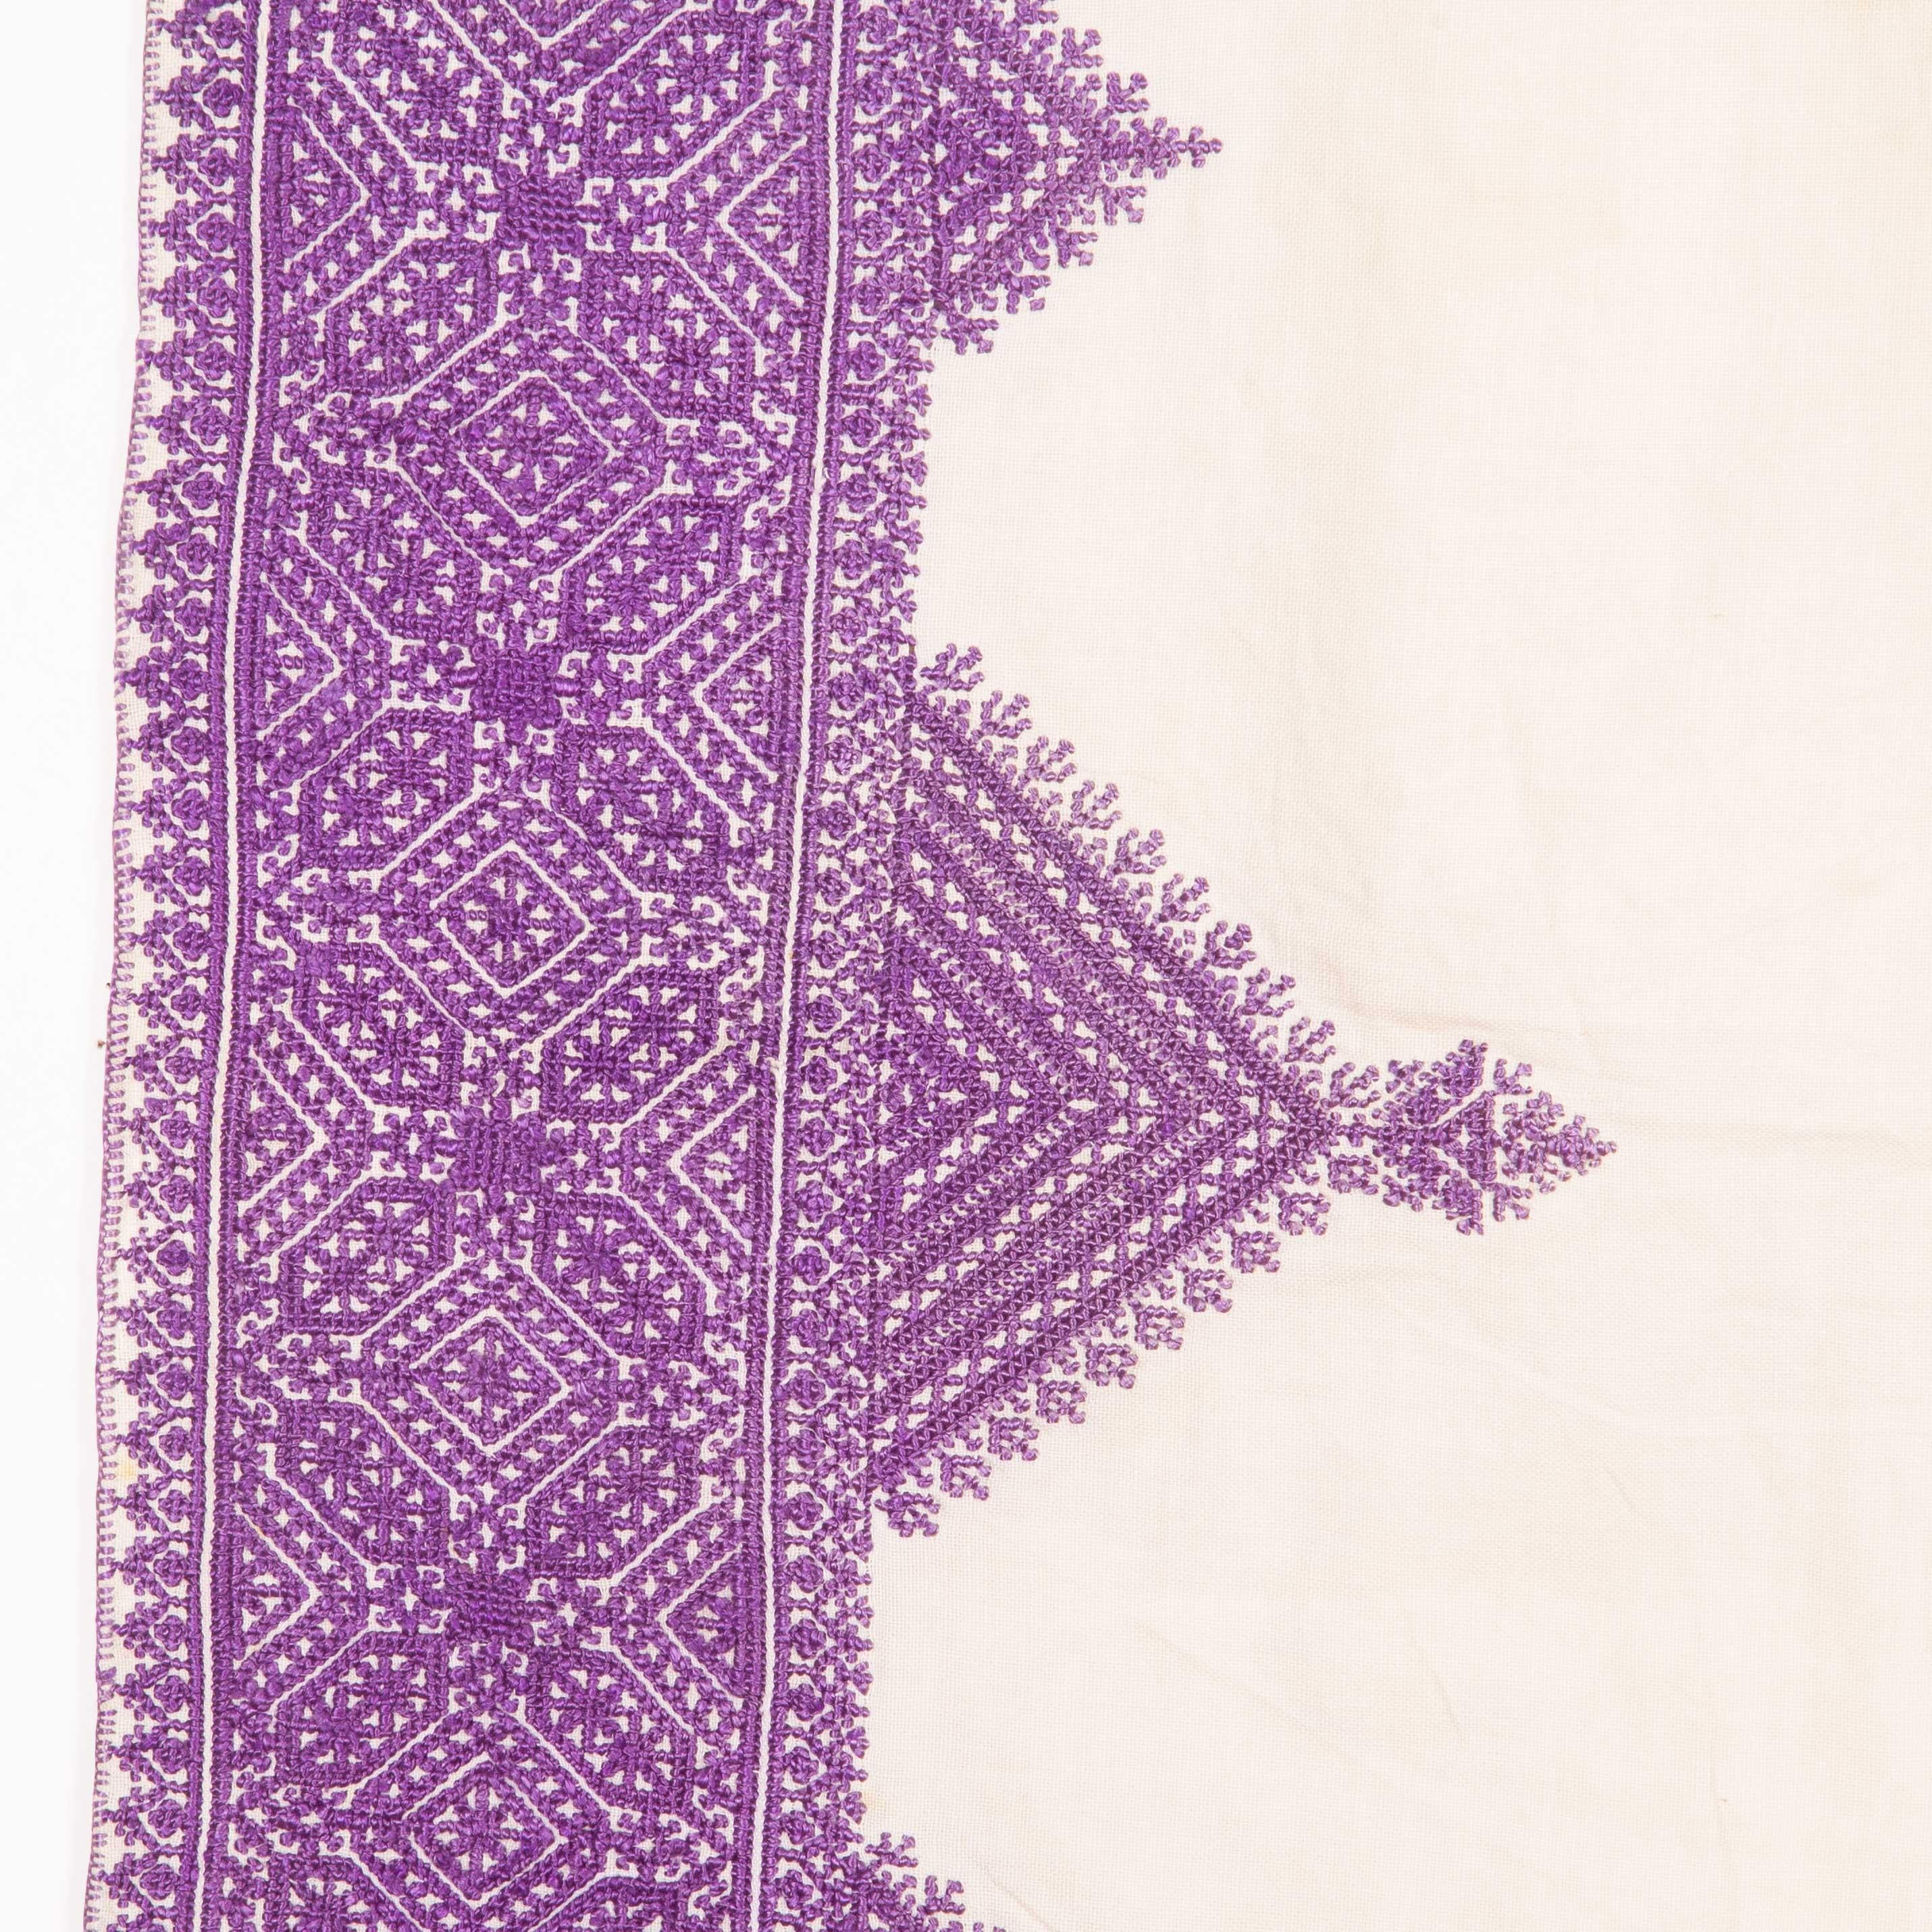 Tribal Antique Fez Embroidered Seat Cover 'Gelsa' from Morocco, Early 20th Century For Sale